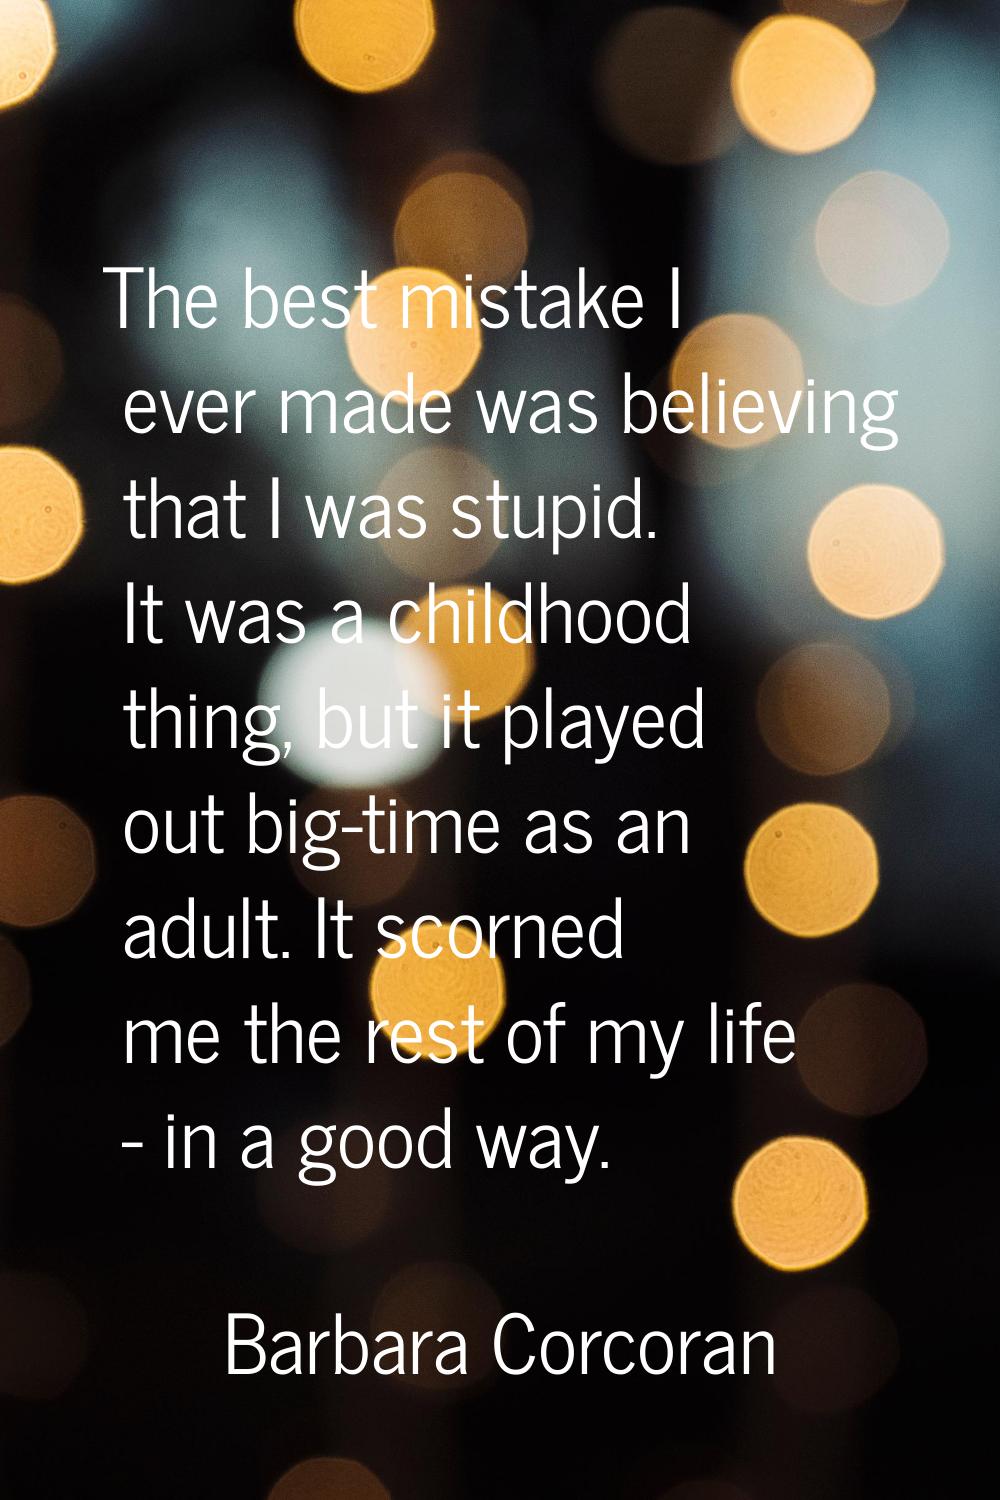 The best mistake I ever made was believing that I was stupid. It was a childhood thing, but it play